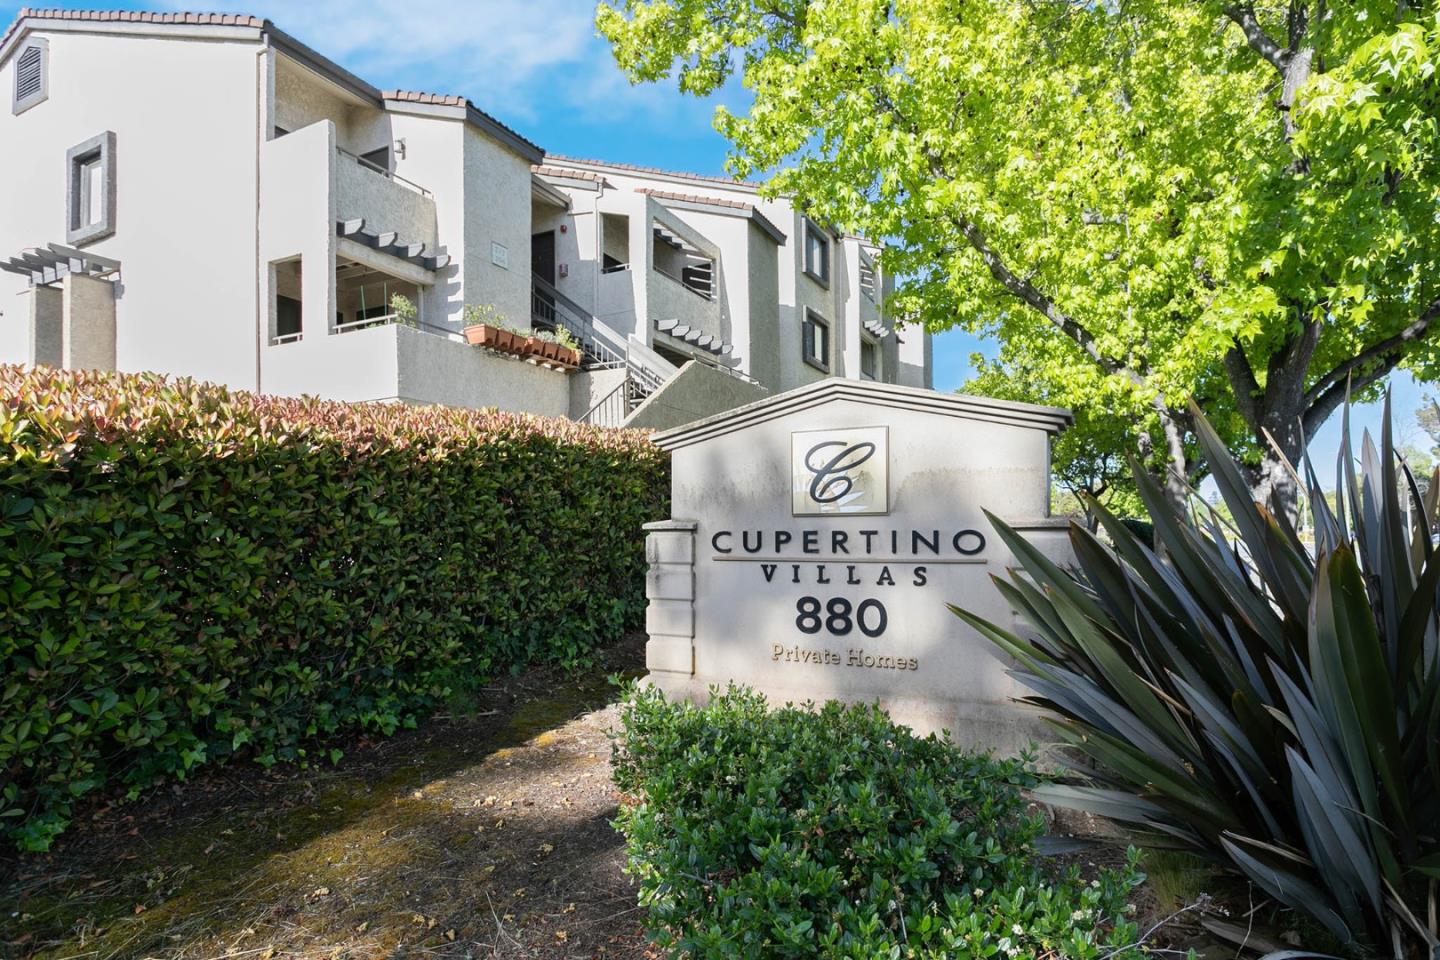 Photo of 880 E Fremont Ave #410 in Sunnyvale, CA